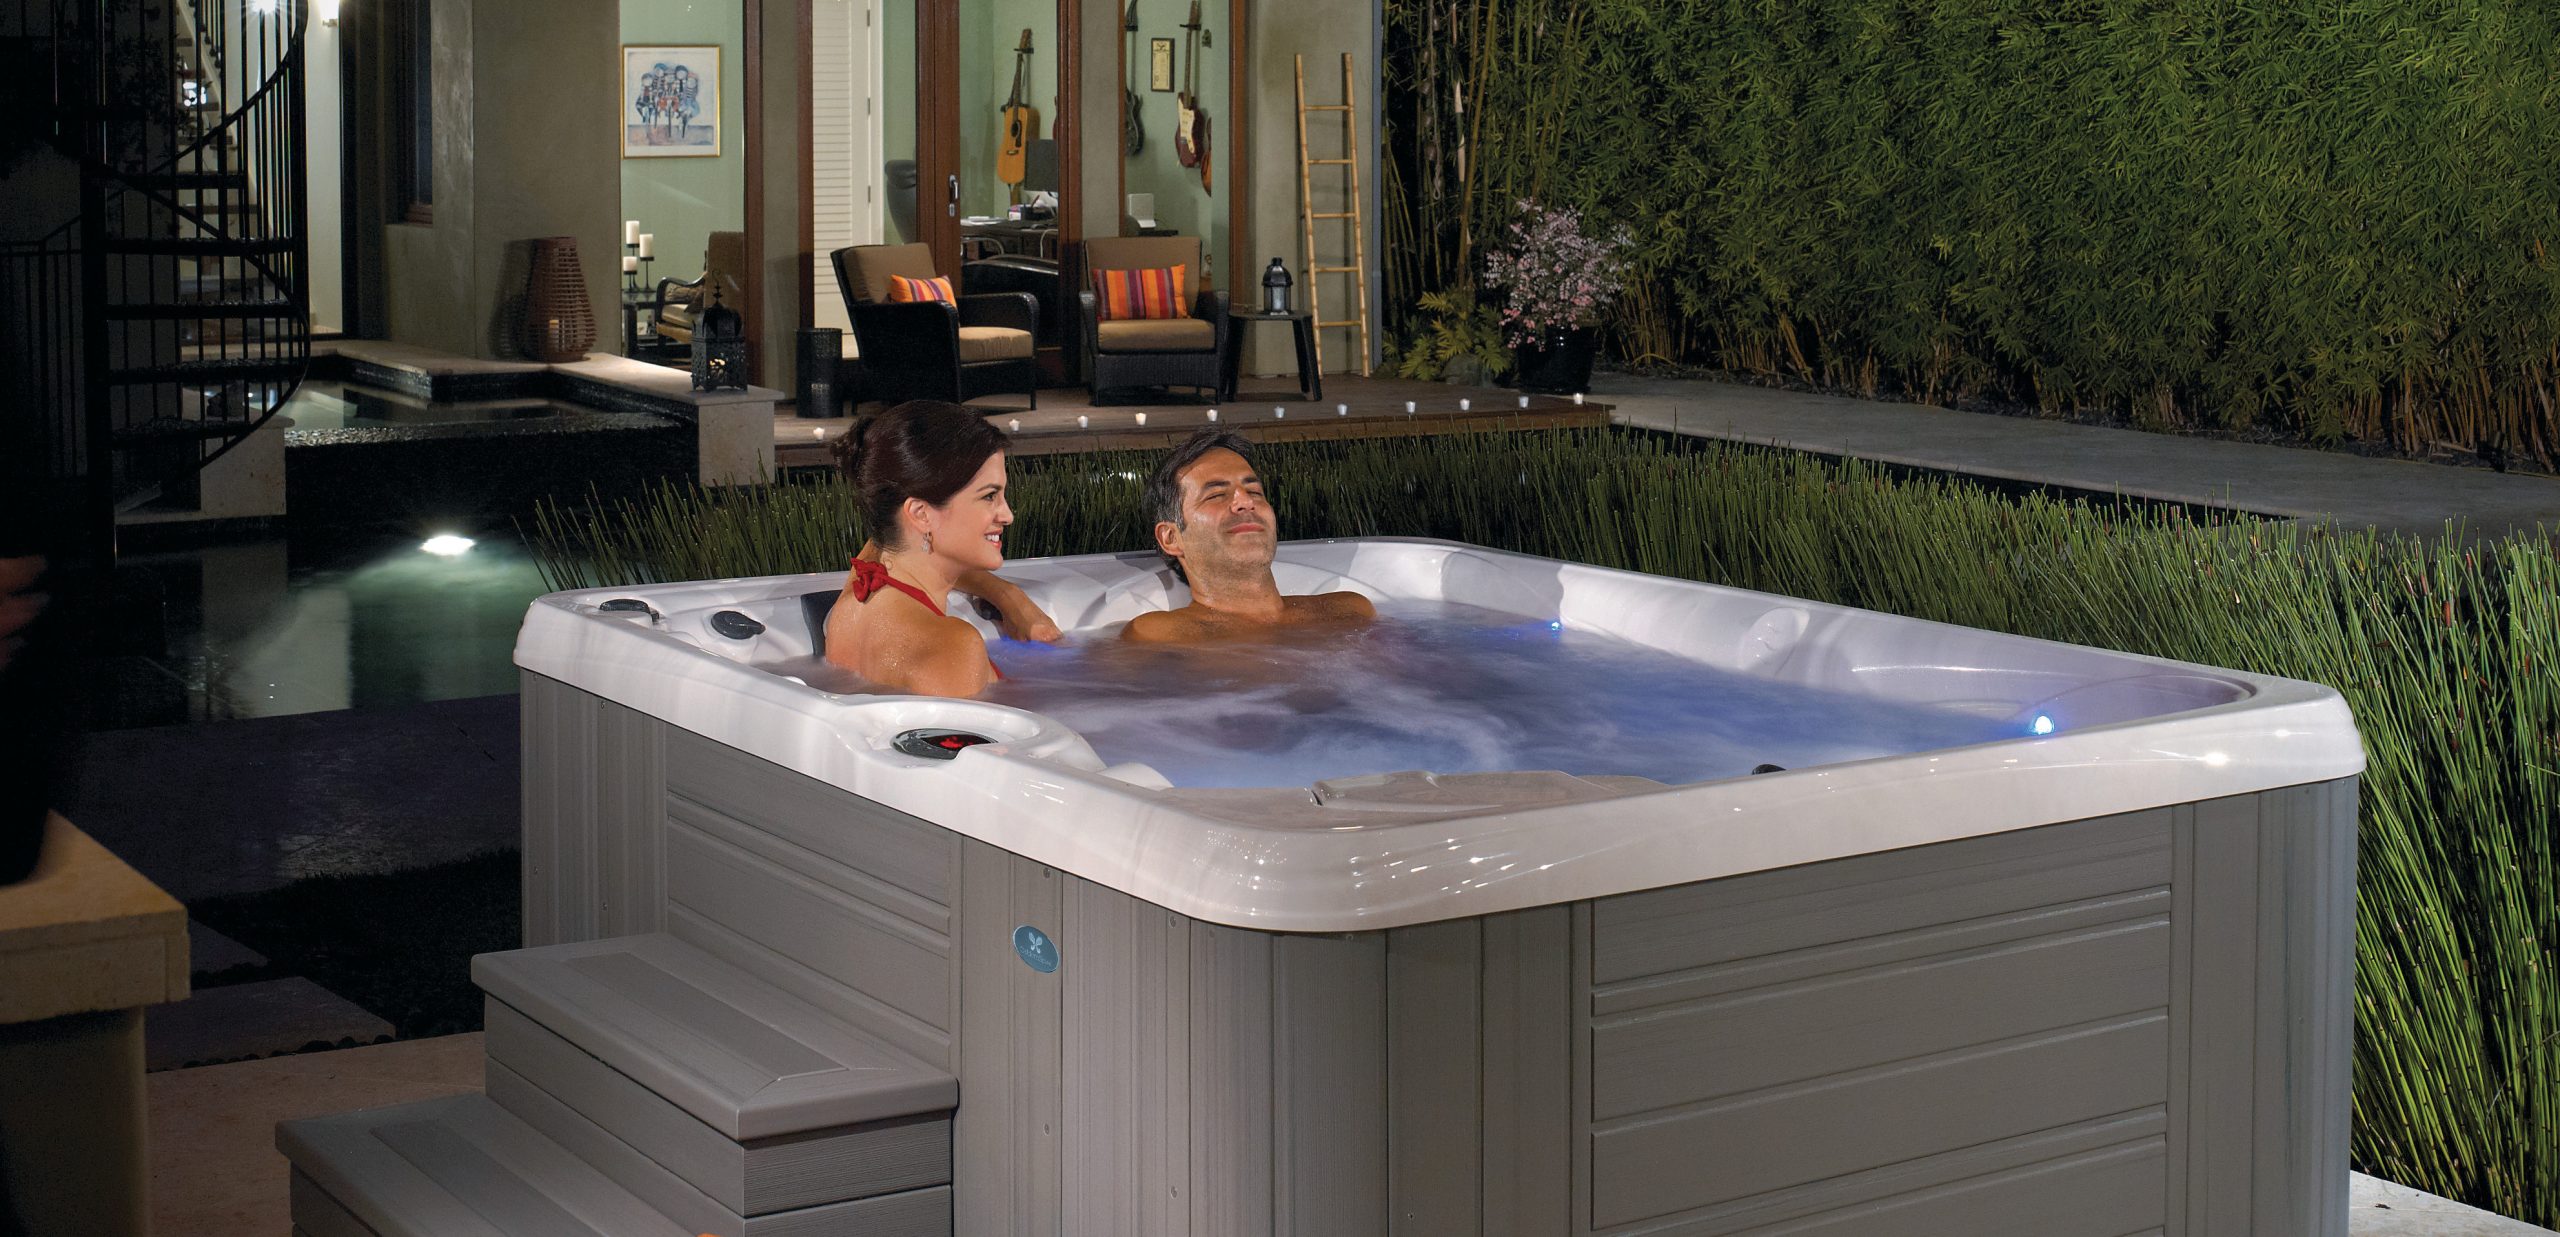 Get Cozy With These Amazing Compact Hot Tub Models